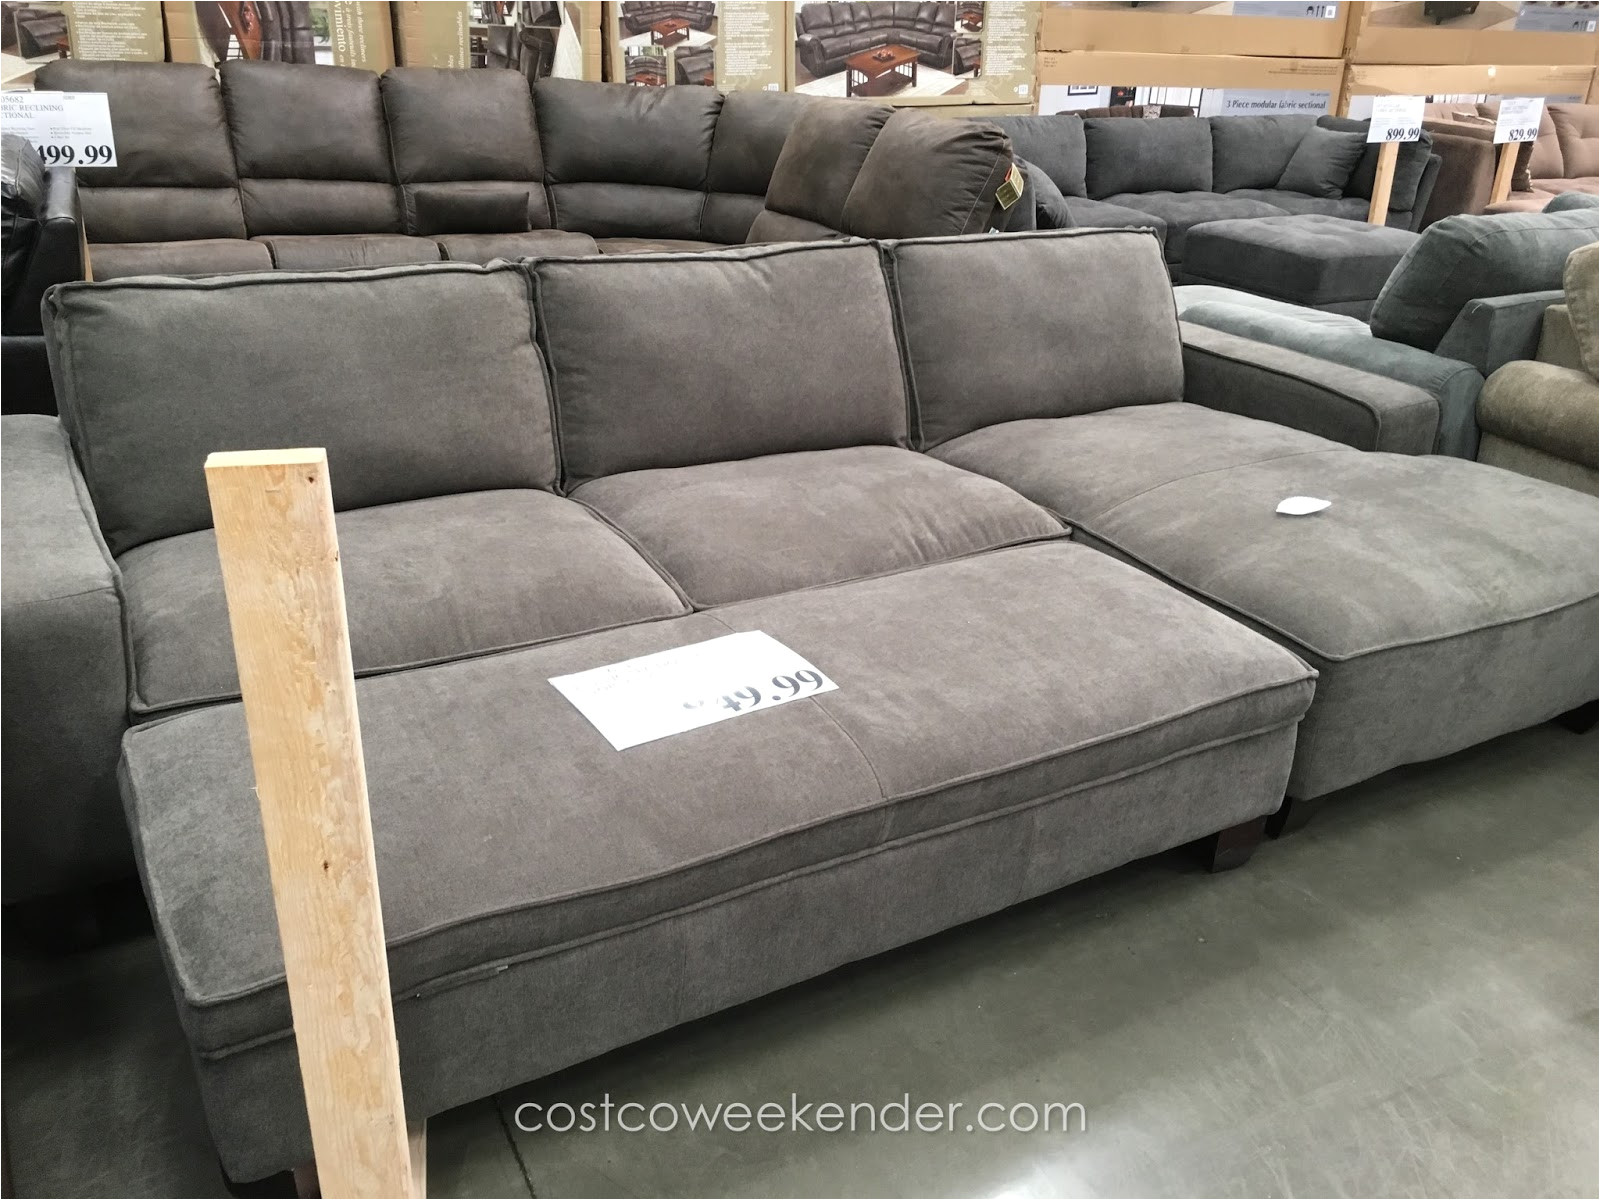 chaise sectional sofa with storage ottoman extra storage and extra sleeping space